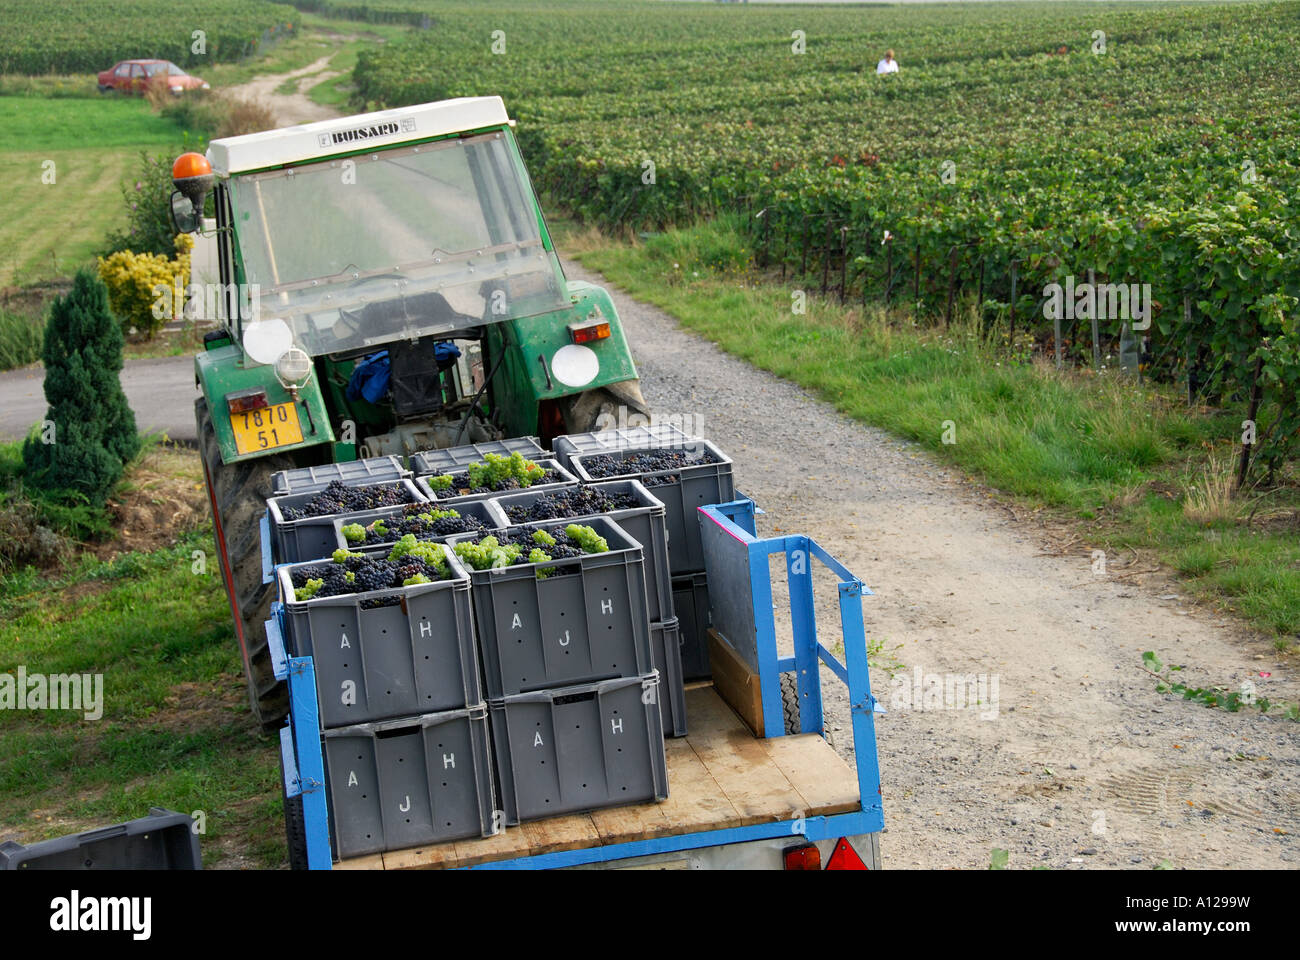 'Bins full of grapes, Chamery, 'Champagne Ardennes', France' Stock Photo